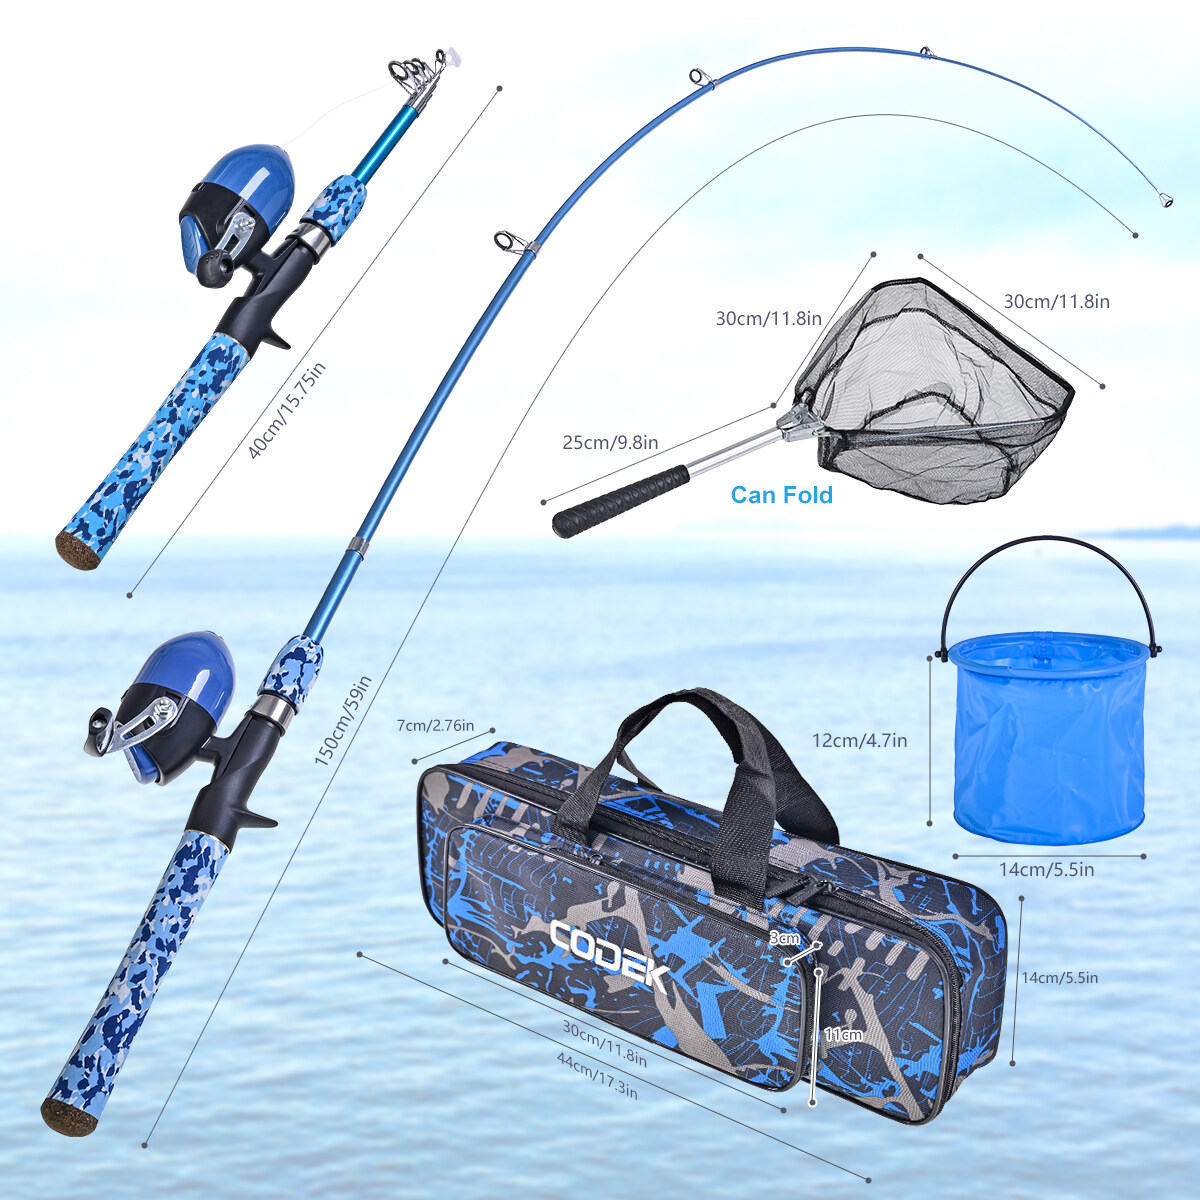 LEO FISHING Spinning Fishing Rod and Reel Combos Set Portable Telescopic  Fishing Pole Set with Full Kits and Carrier Case for Travel Salt and Fresh